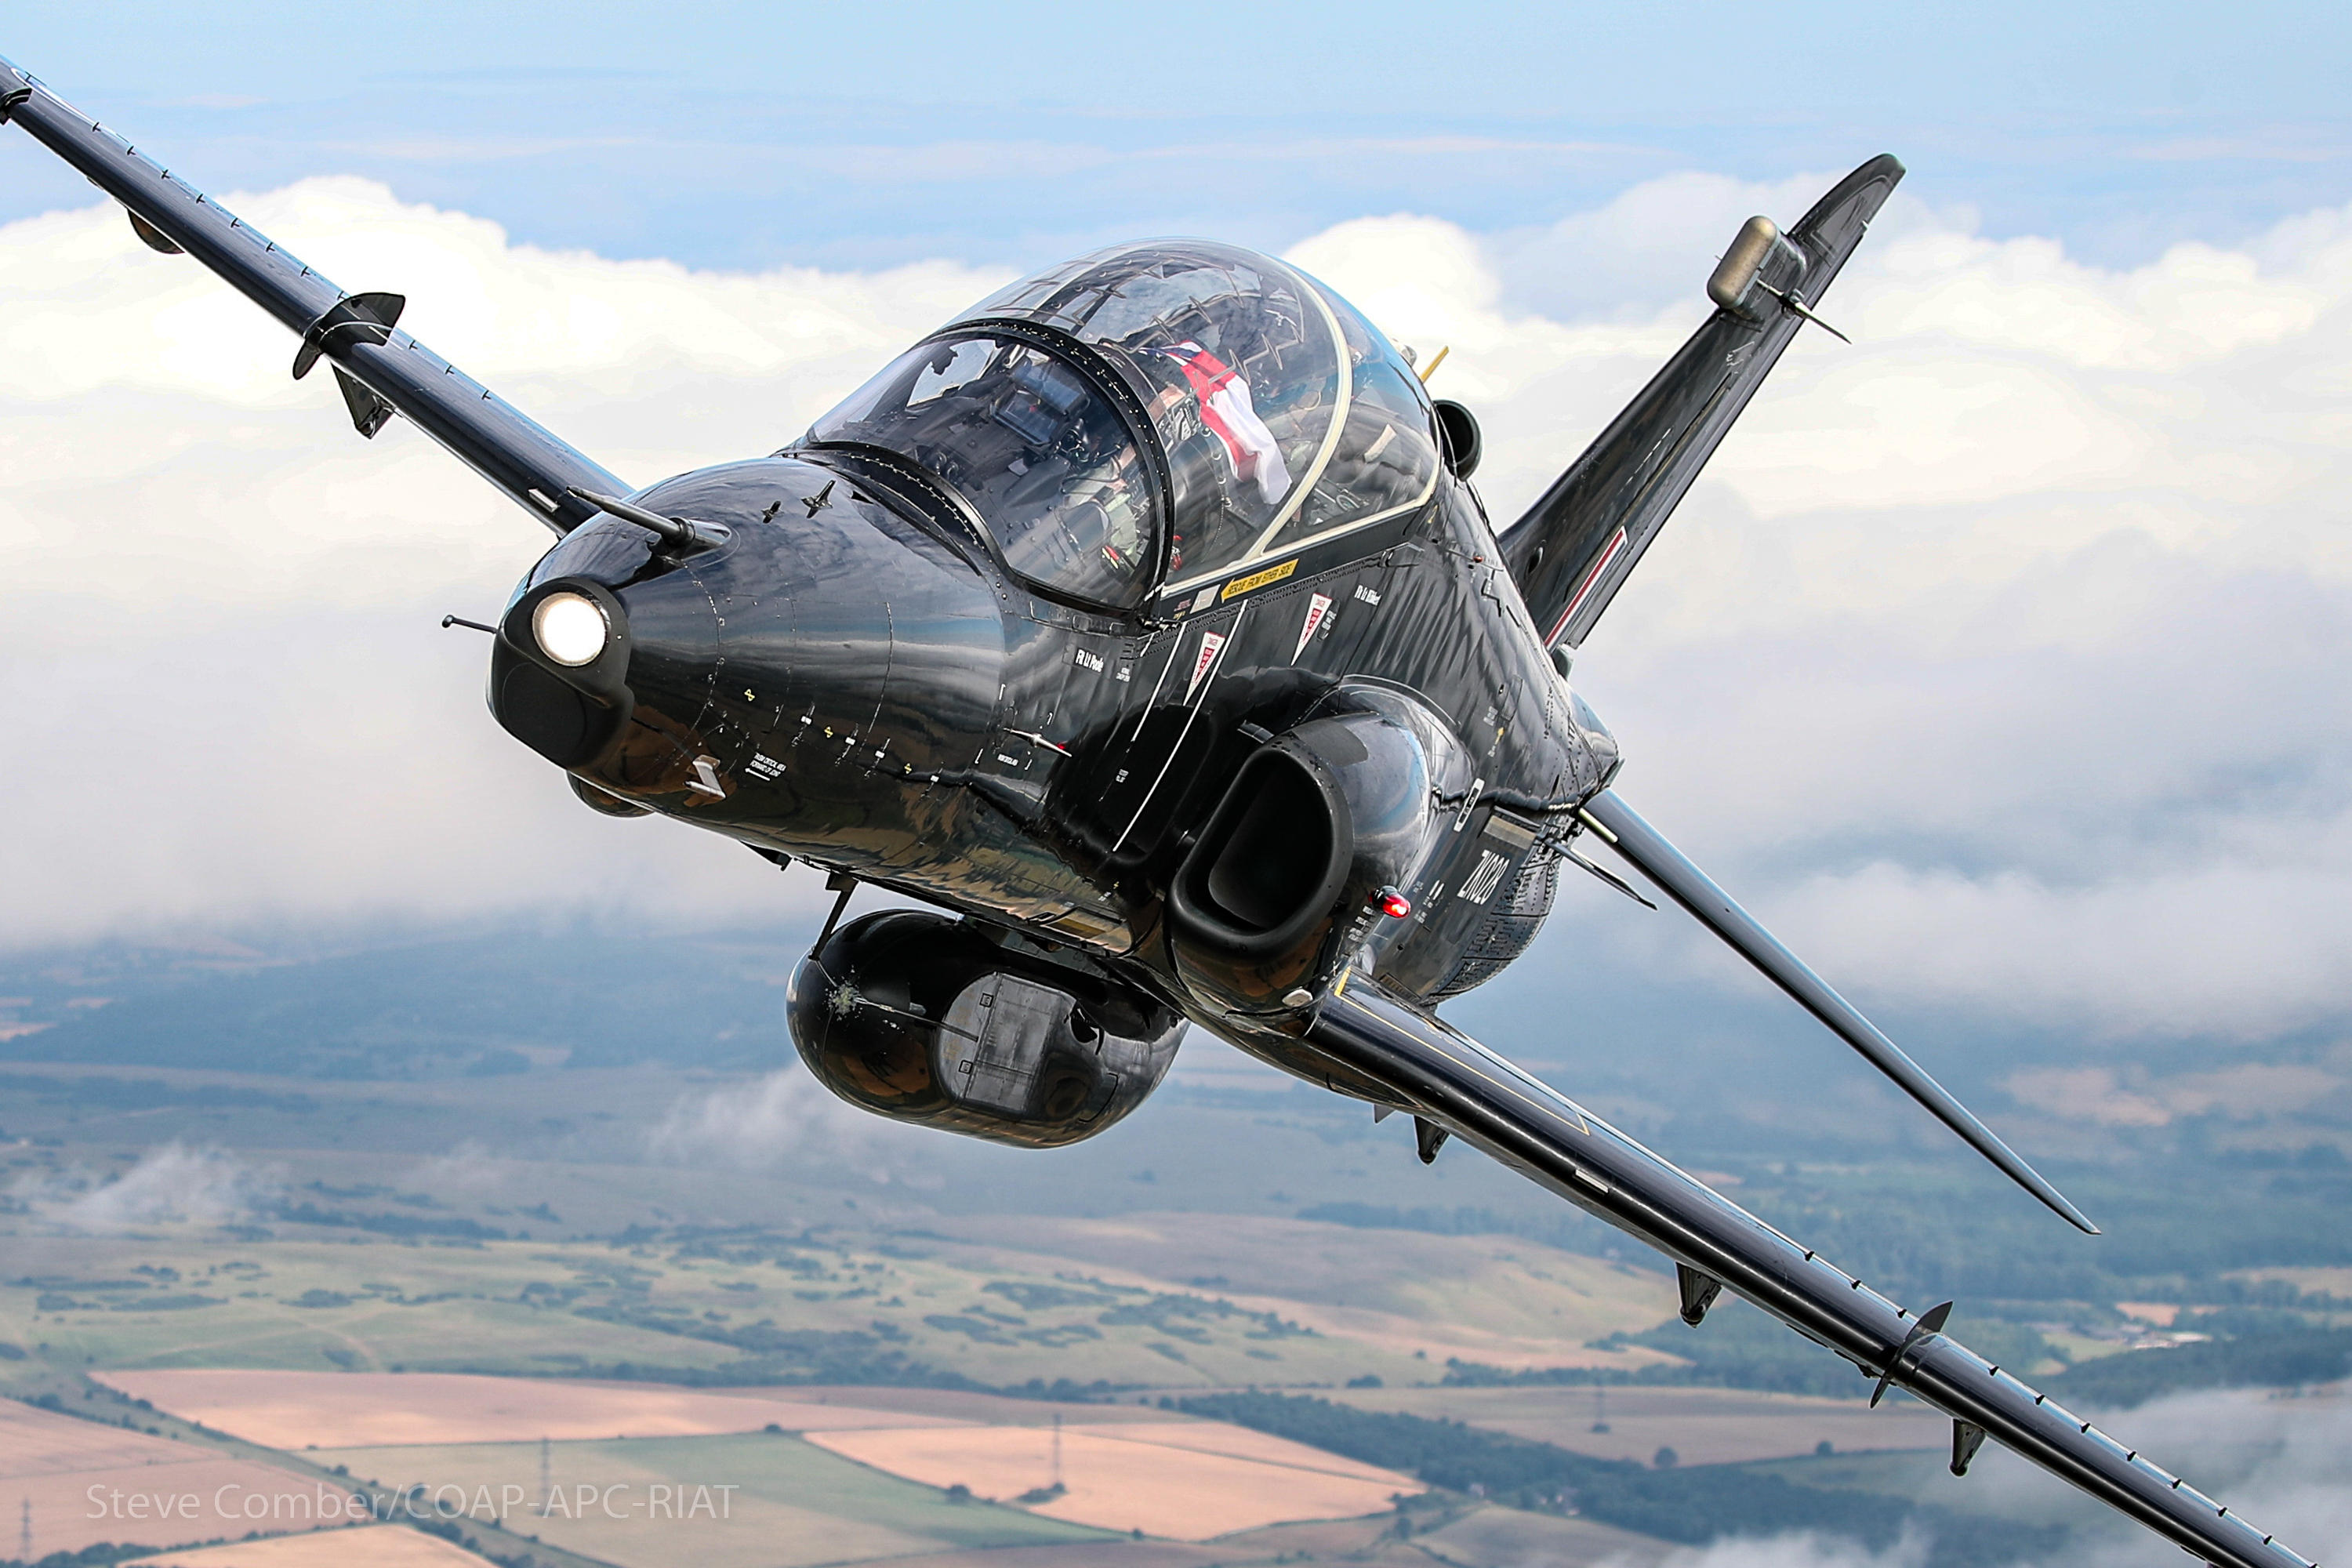 Image shows Hawk T2 aircraft in flight.